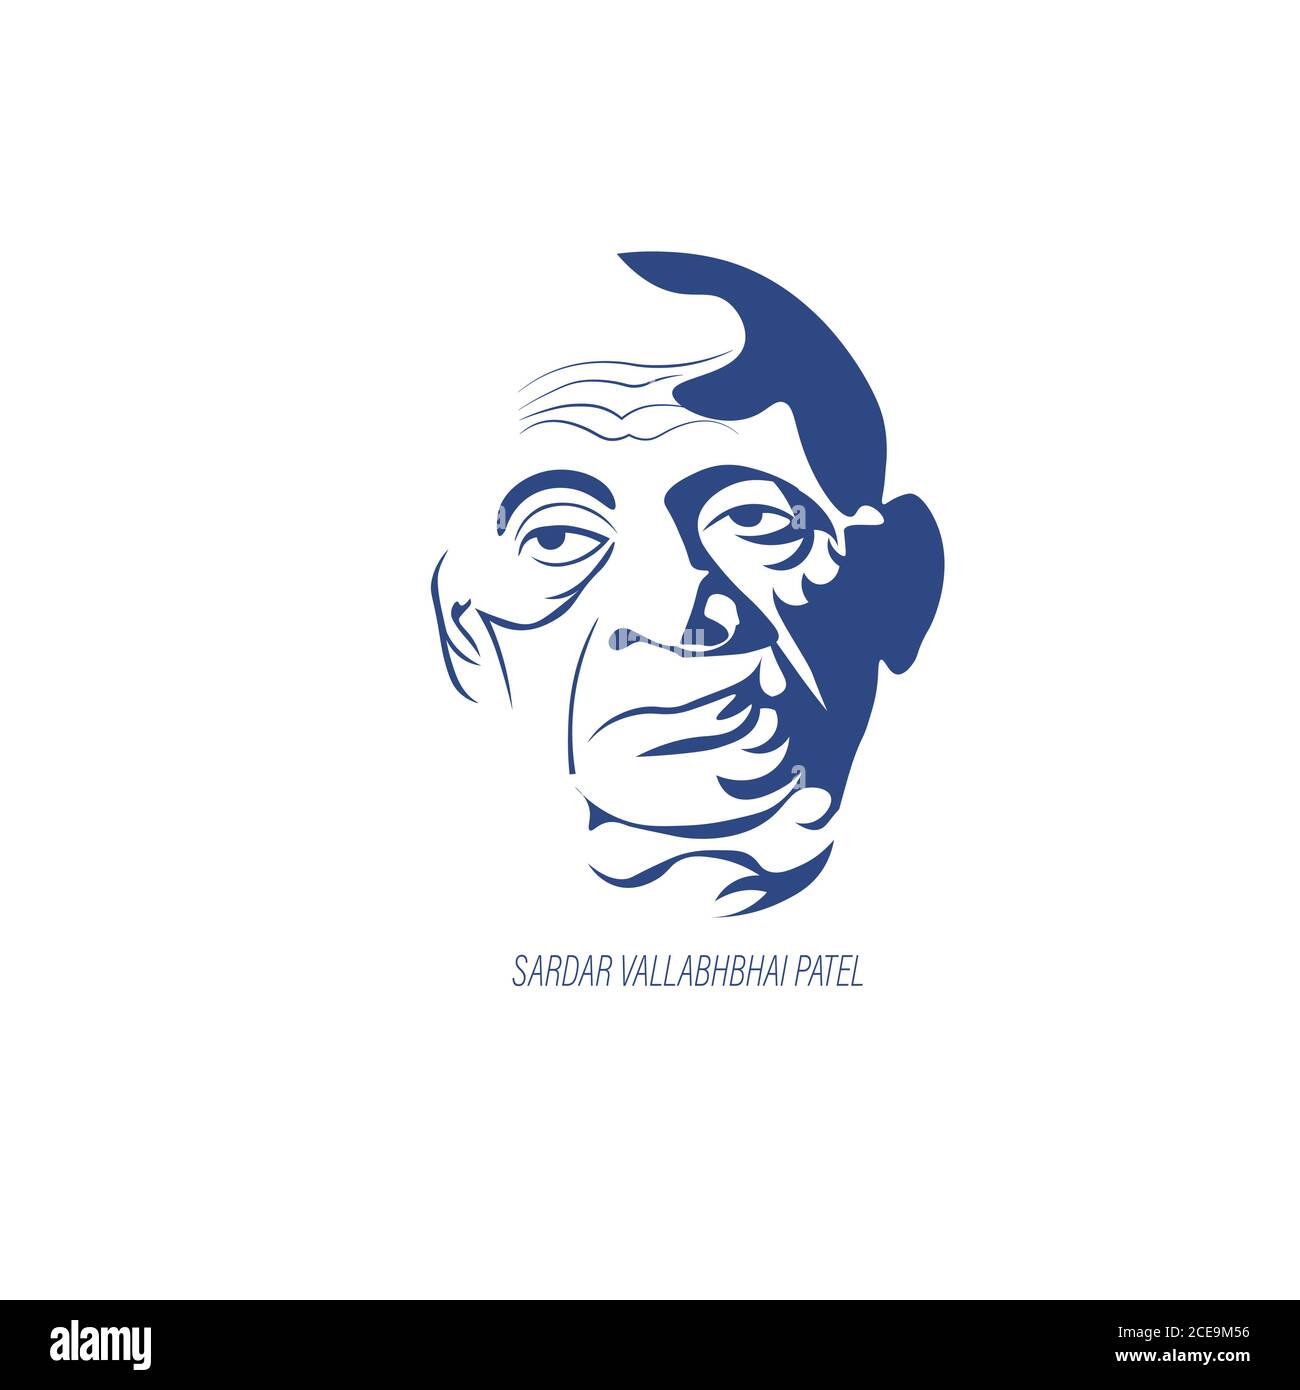 Vector Illustration of Sardar Vallabhbhai Patel, the Iron man of India during independence 1947. Sketch with tricolor Indian Flag. Stock Vector